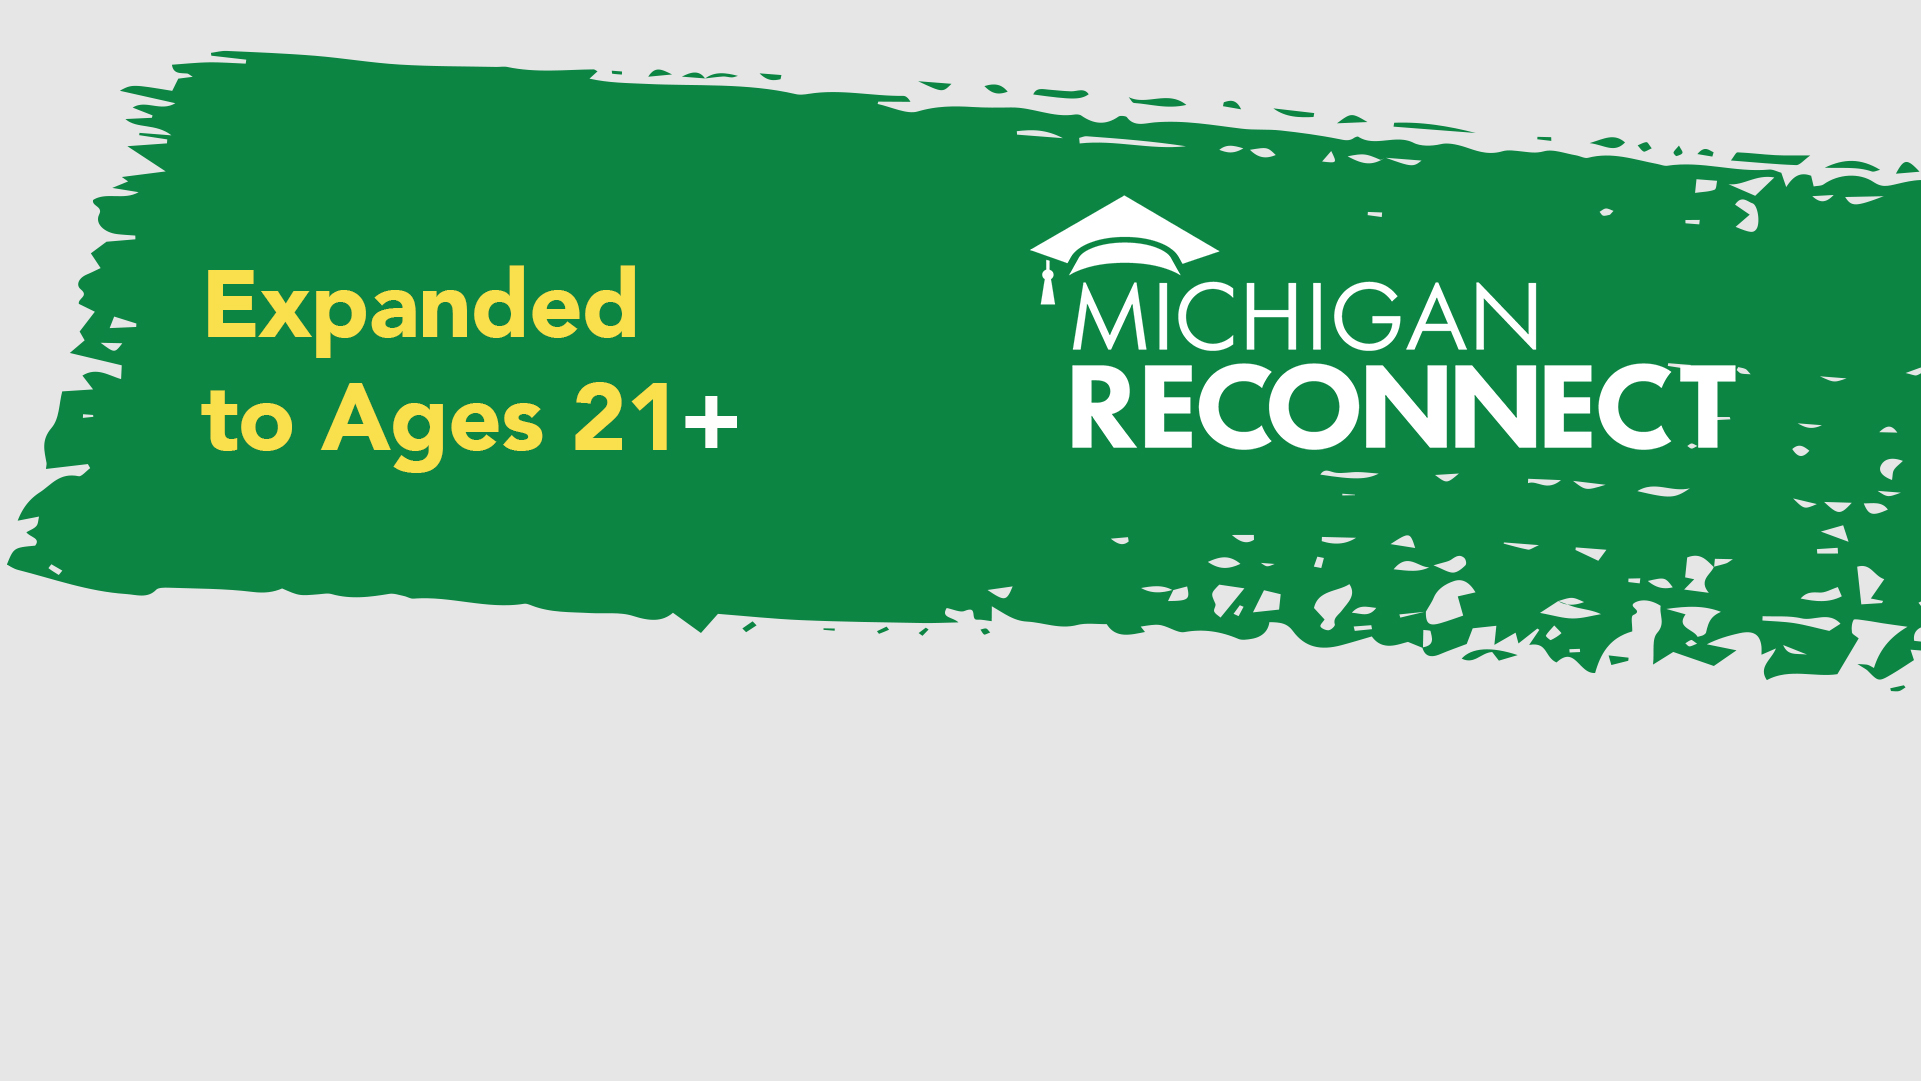 Michigan Reconnect expanded age group to include more Michigan residents.